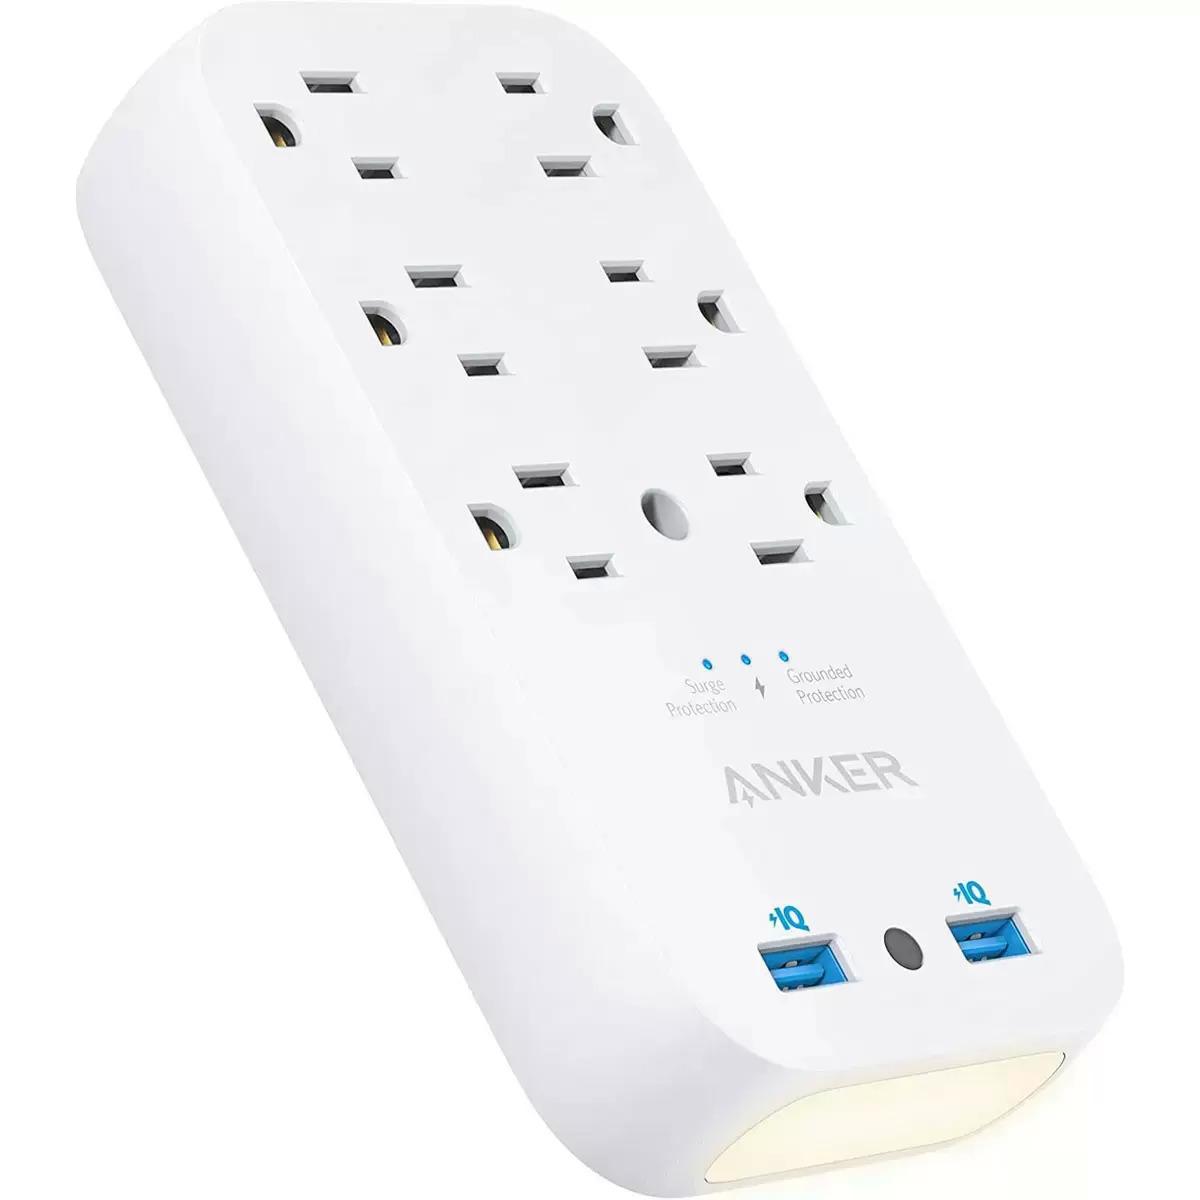 Anker 18W Outlet Extender with 6 AC Outlets for $12.99